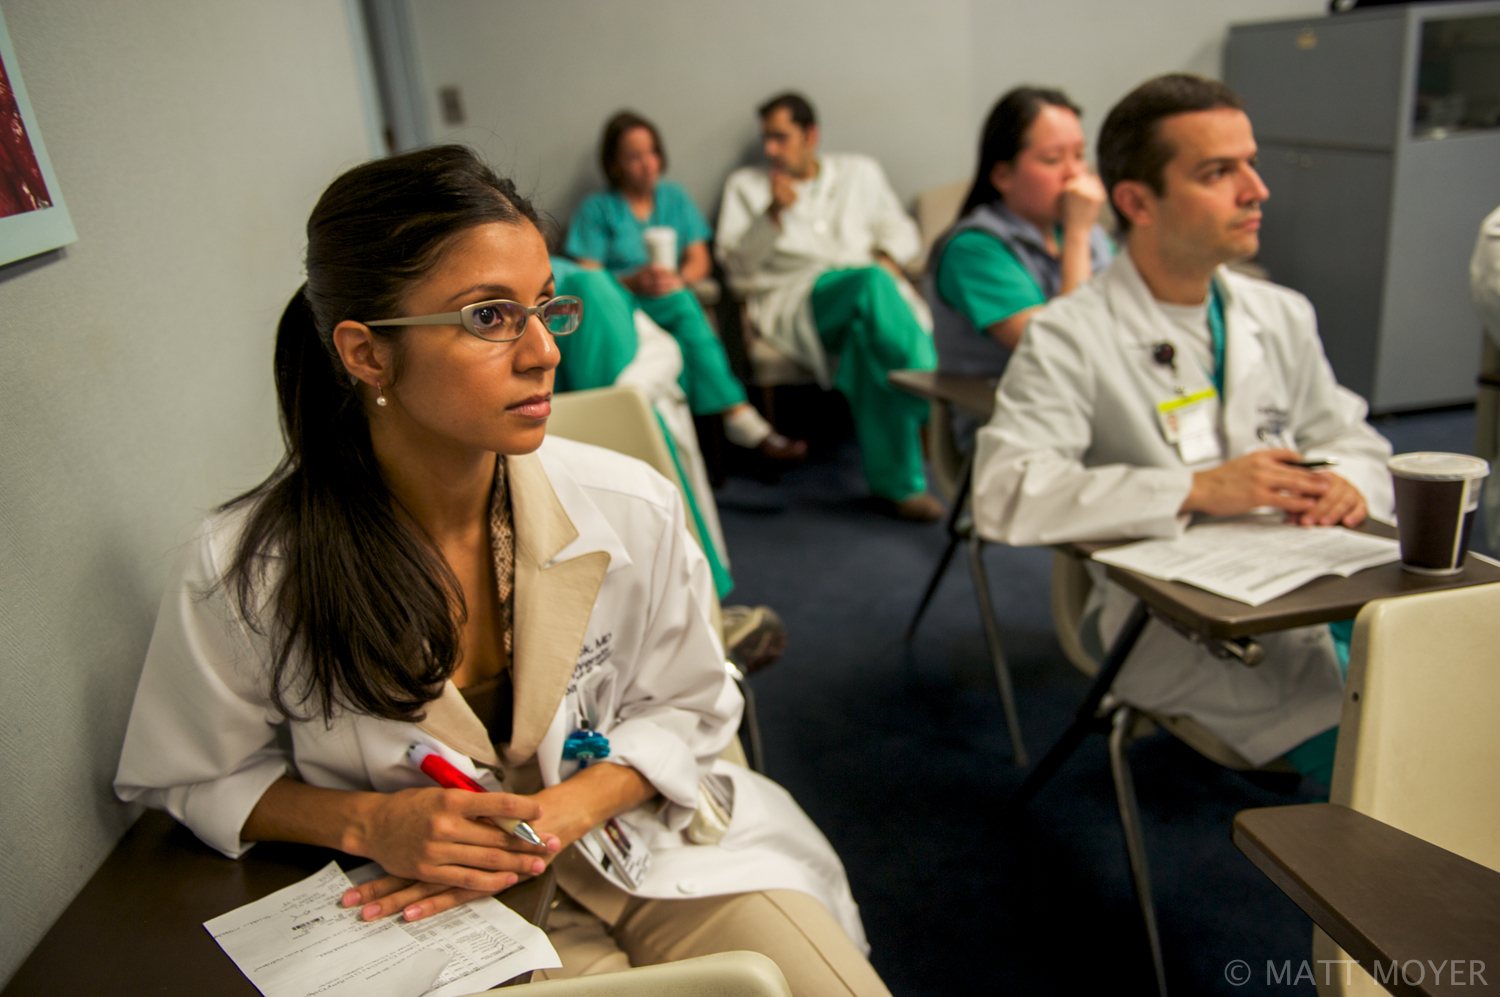  Dr. Carla Haack, left, a twenty five-year-old surgical resident, sits in on a medical briefing at Grady Memorial Hospital. 